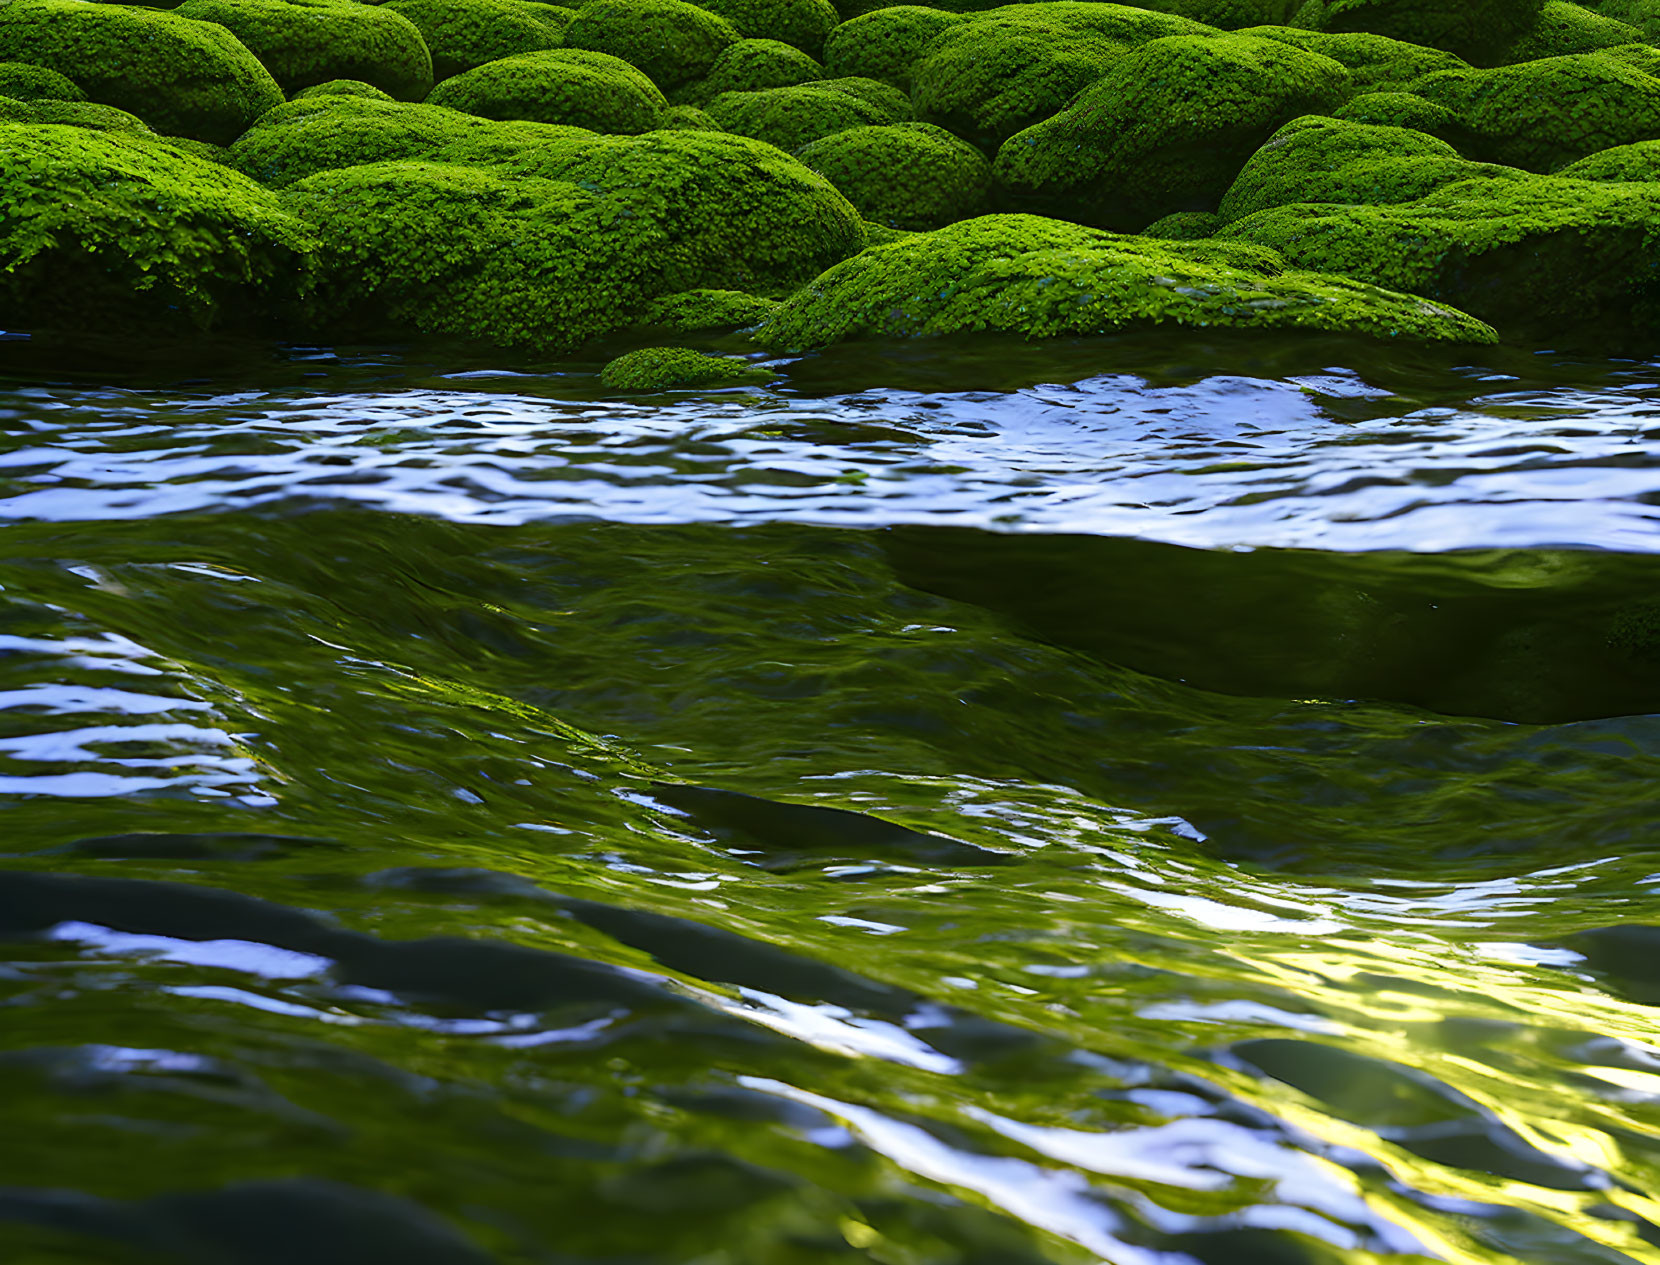 Moss-Covered Rocks Near Rippling Water with Sunlight Reflection